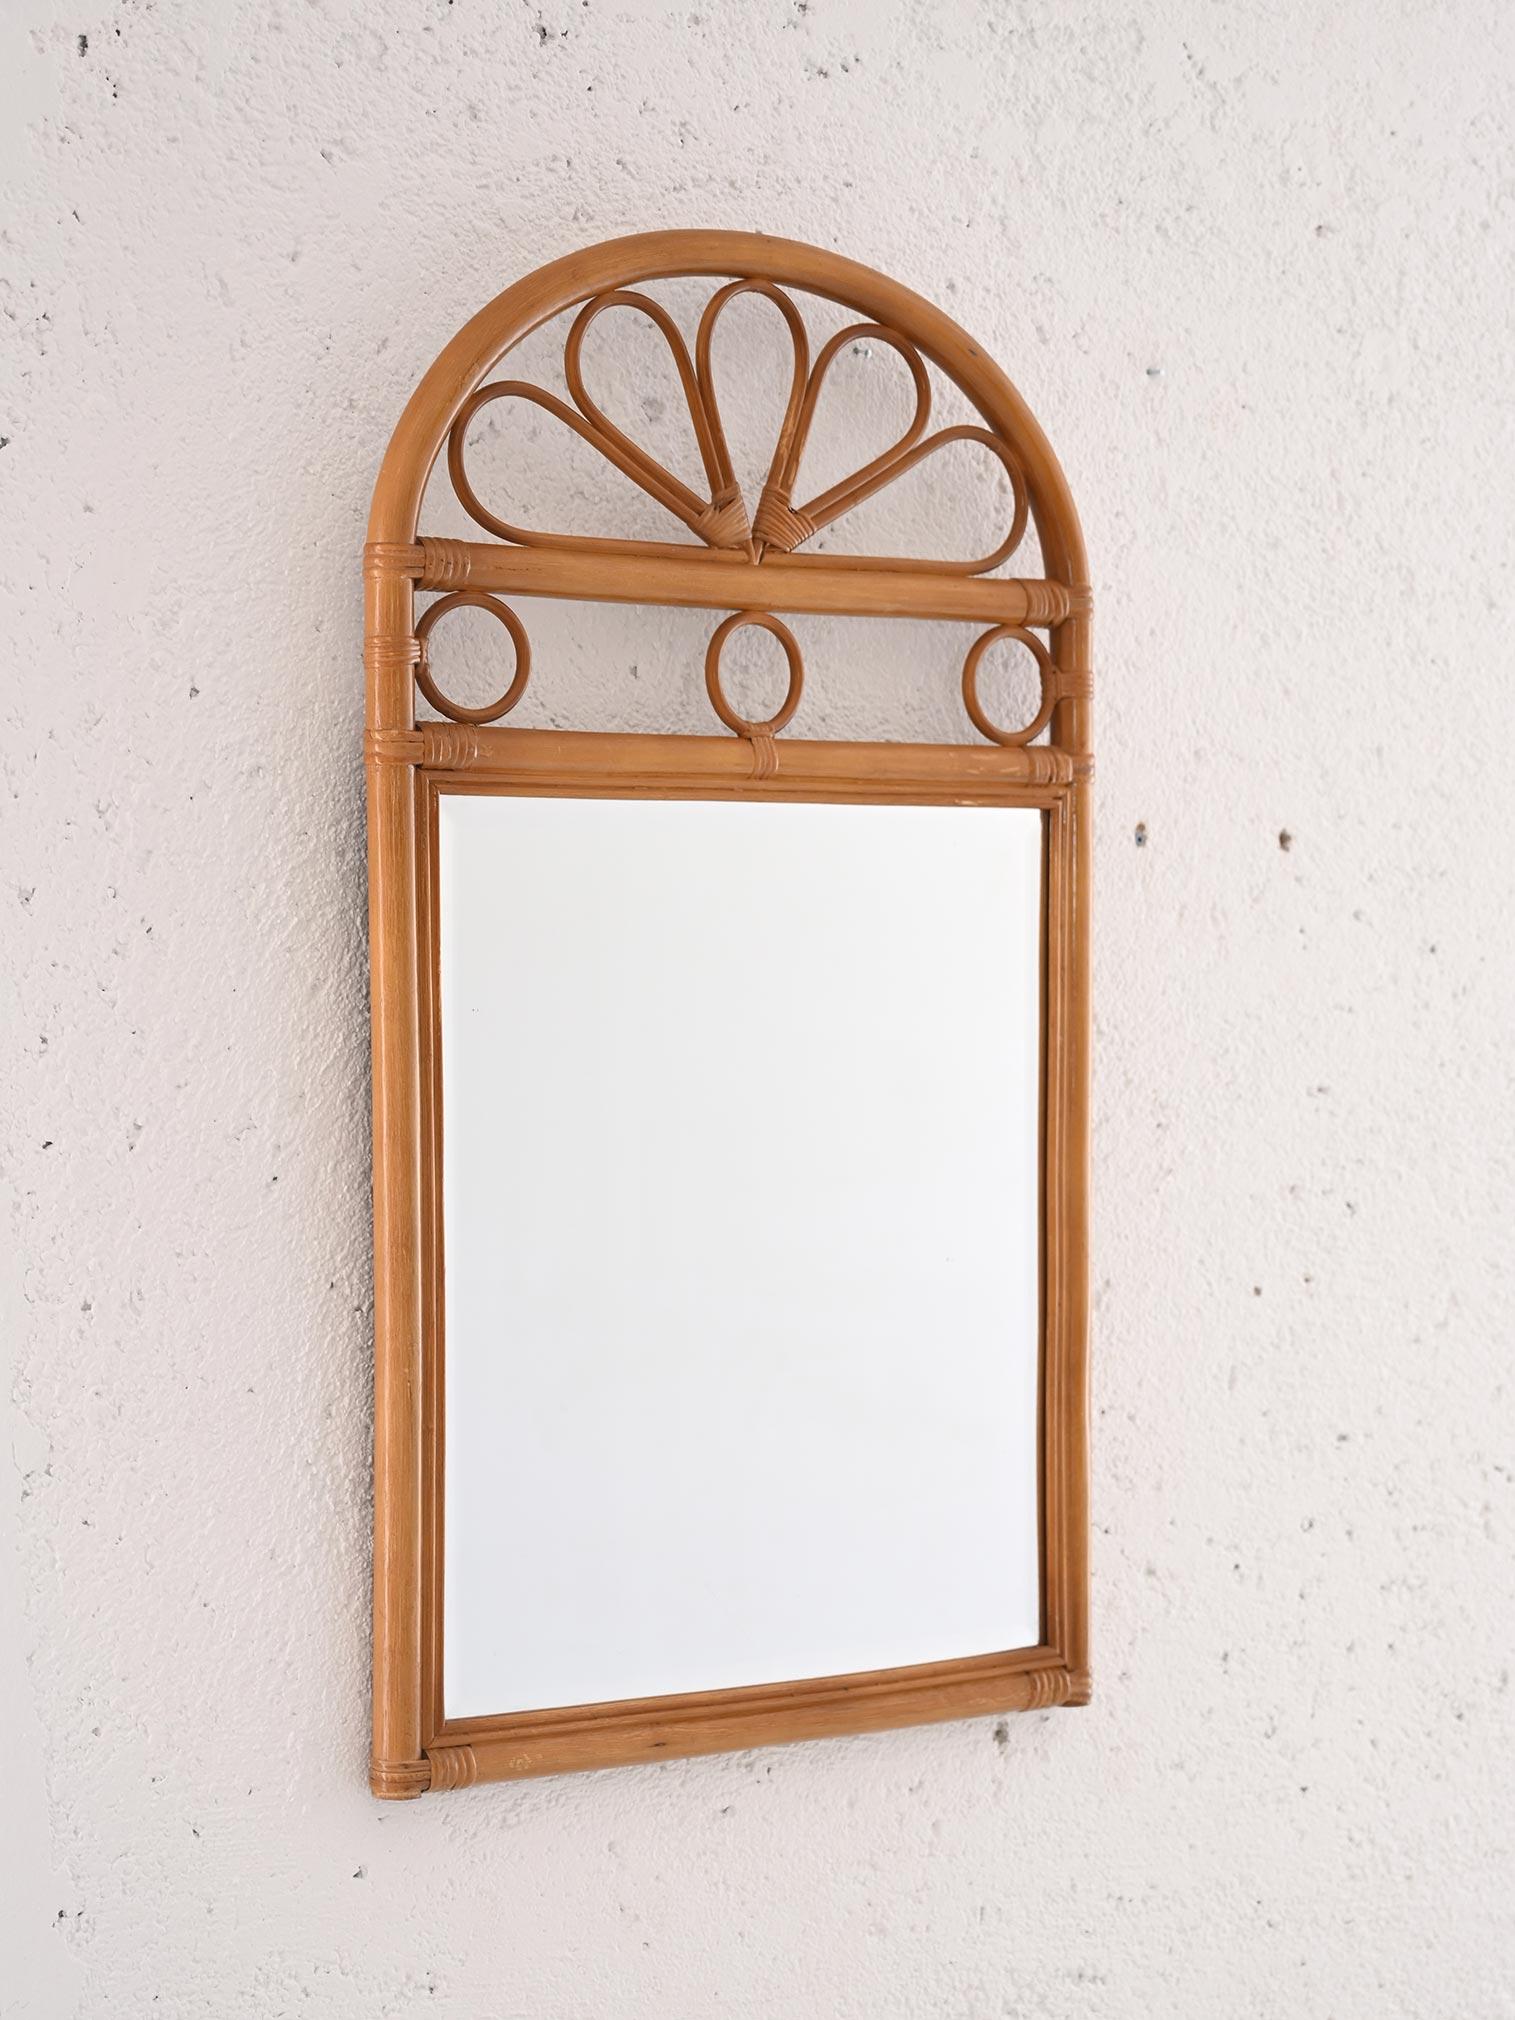 Furnishing item of Scandinavian origin original vintage. 

The mirror frame is made entirely of bamboo, a lightweight and durable material that lends a cozy and warm atmosphere to the room. 
What makes this frame truly special is its top decoration.